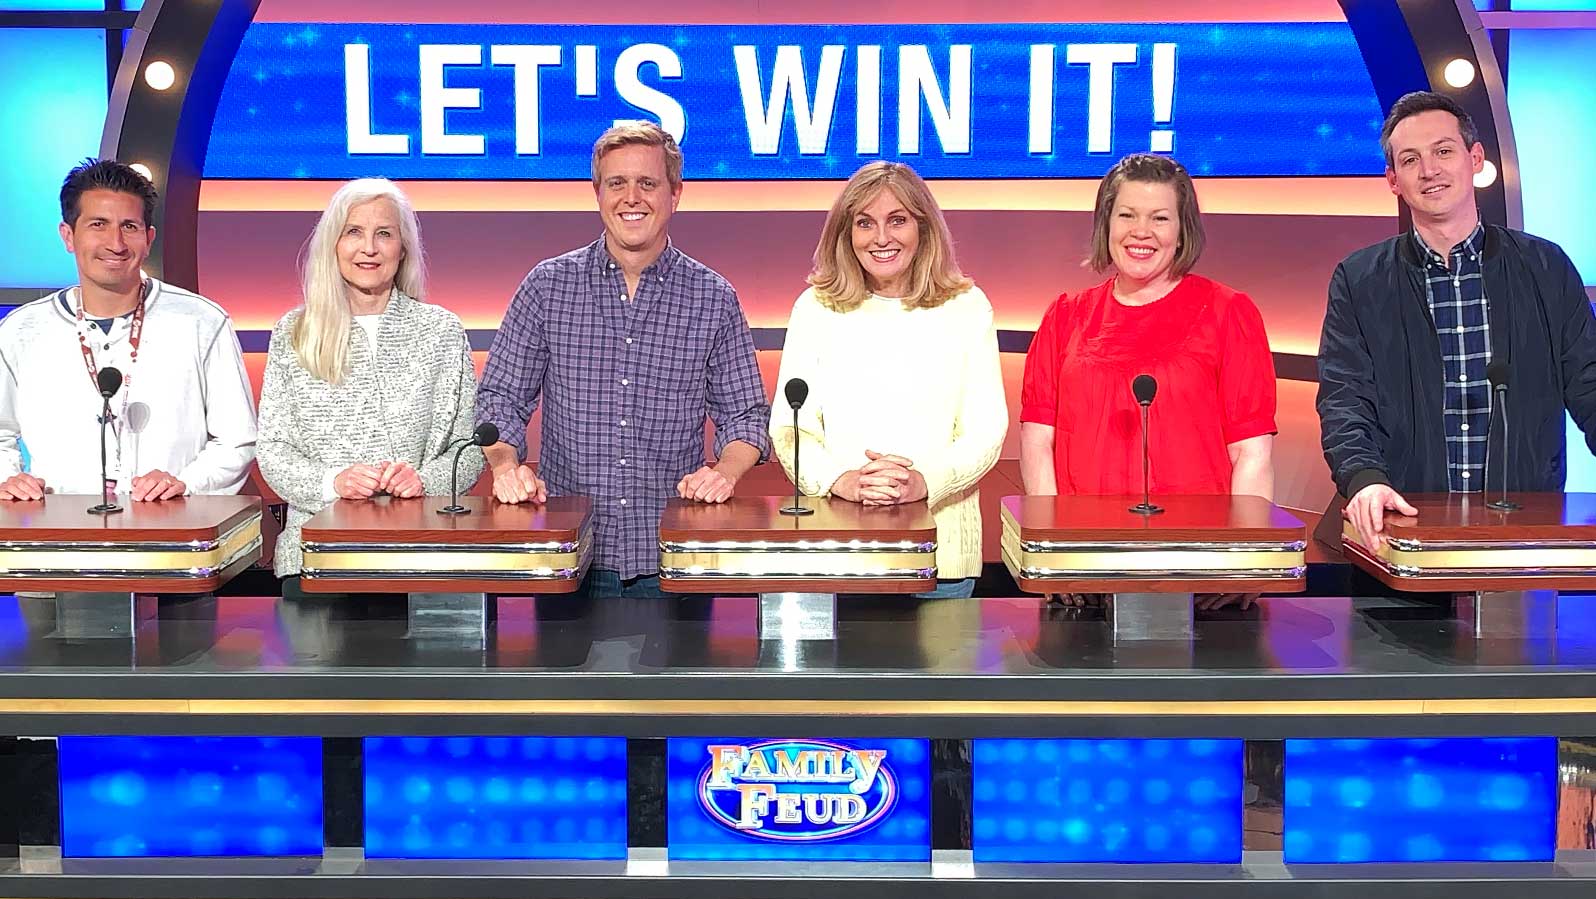 Family Feud producers